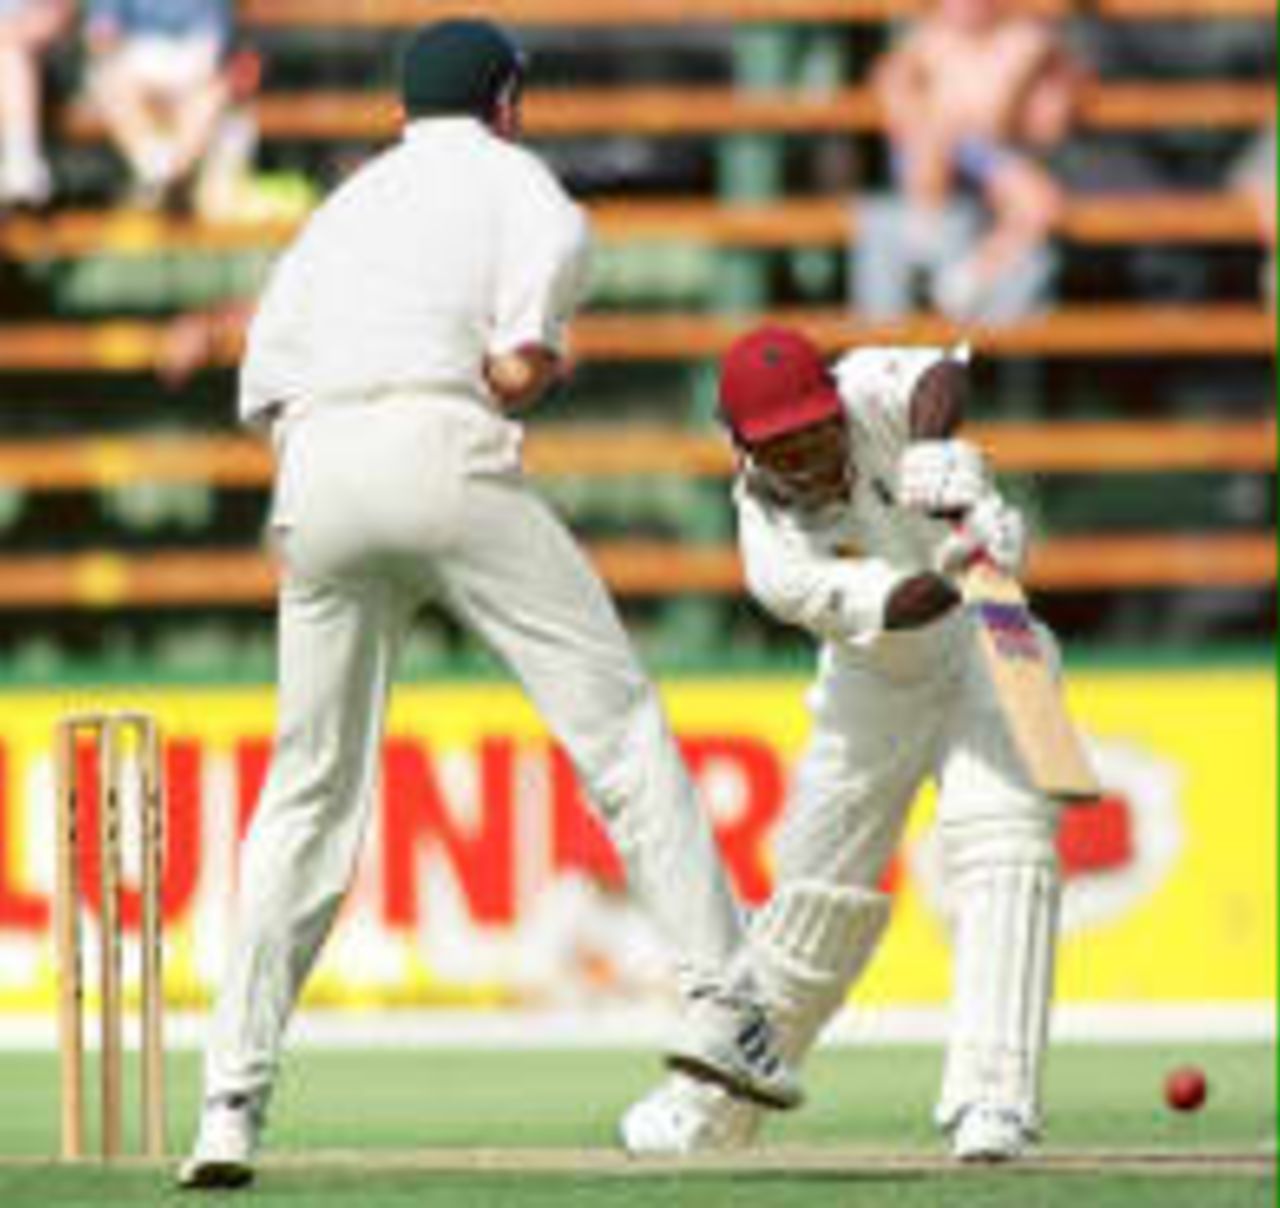 Stuart Williams plays defensively Cronje is the fielder West Indies in South Africa, 1998/99, 1st Test  South Africa v West Indies  The Wanderers, Johannesburg  26 November 1998